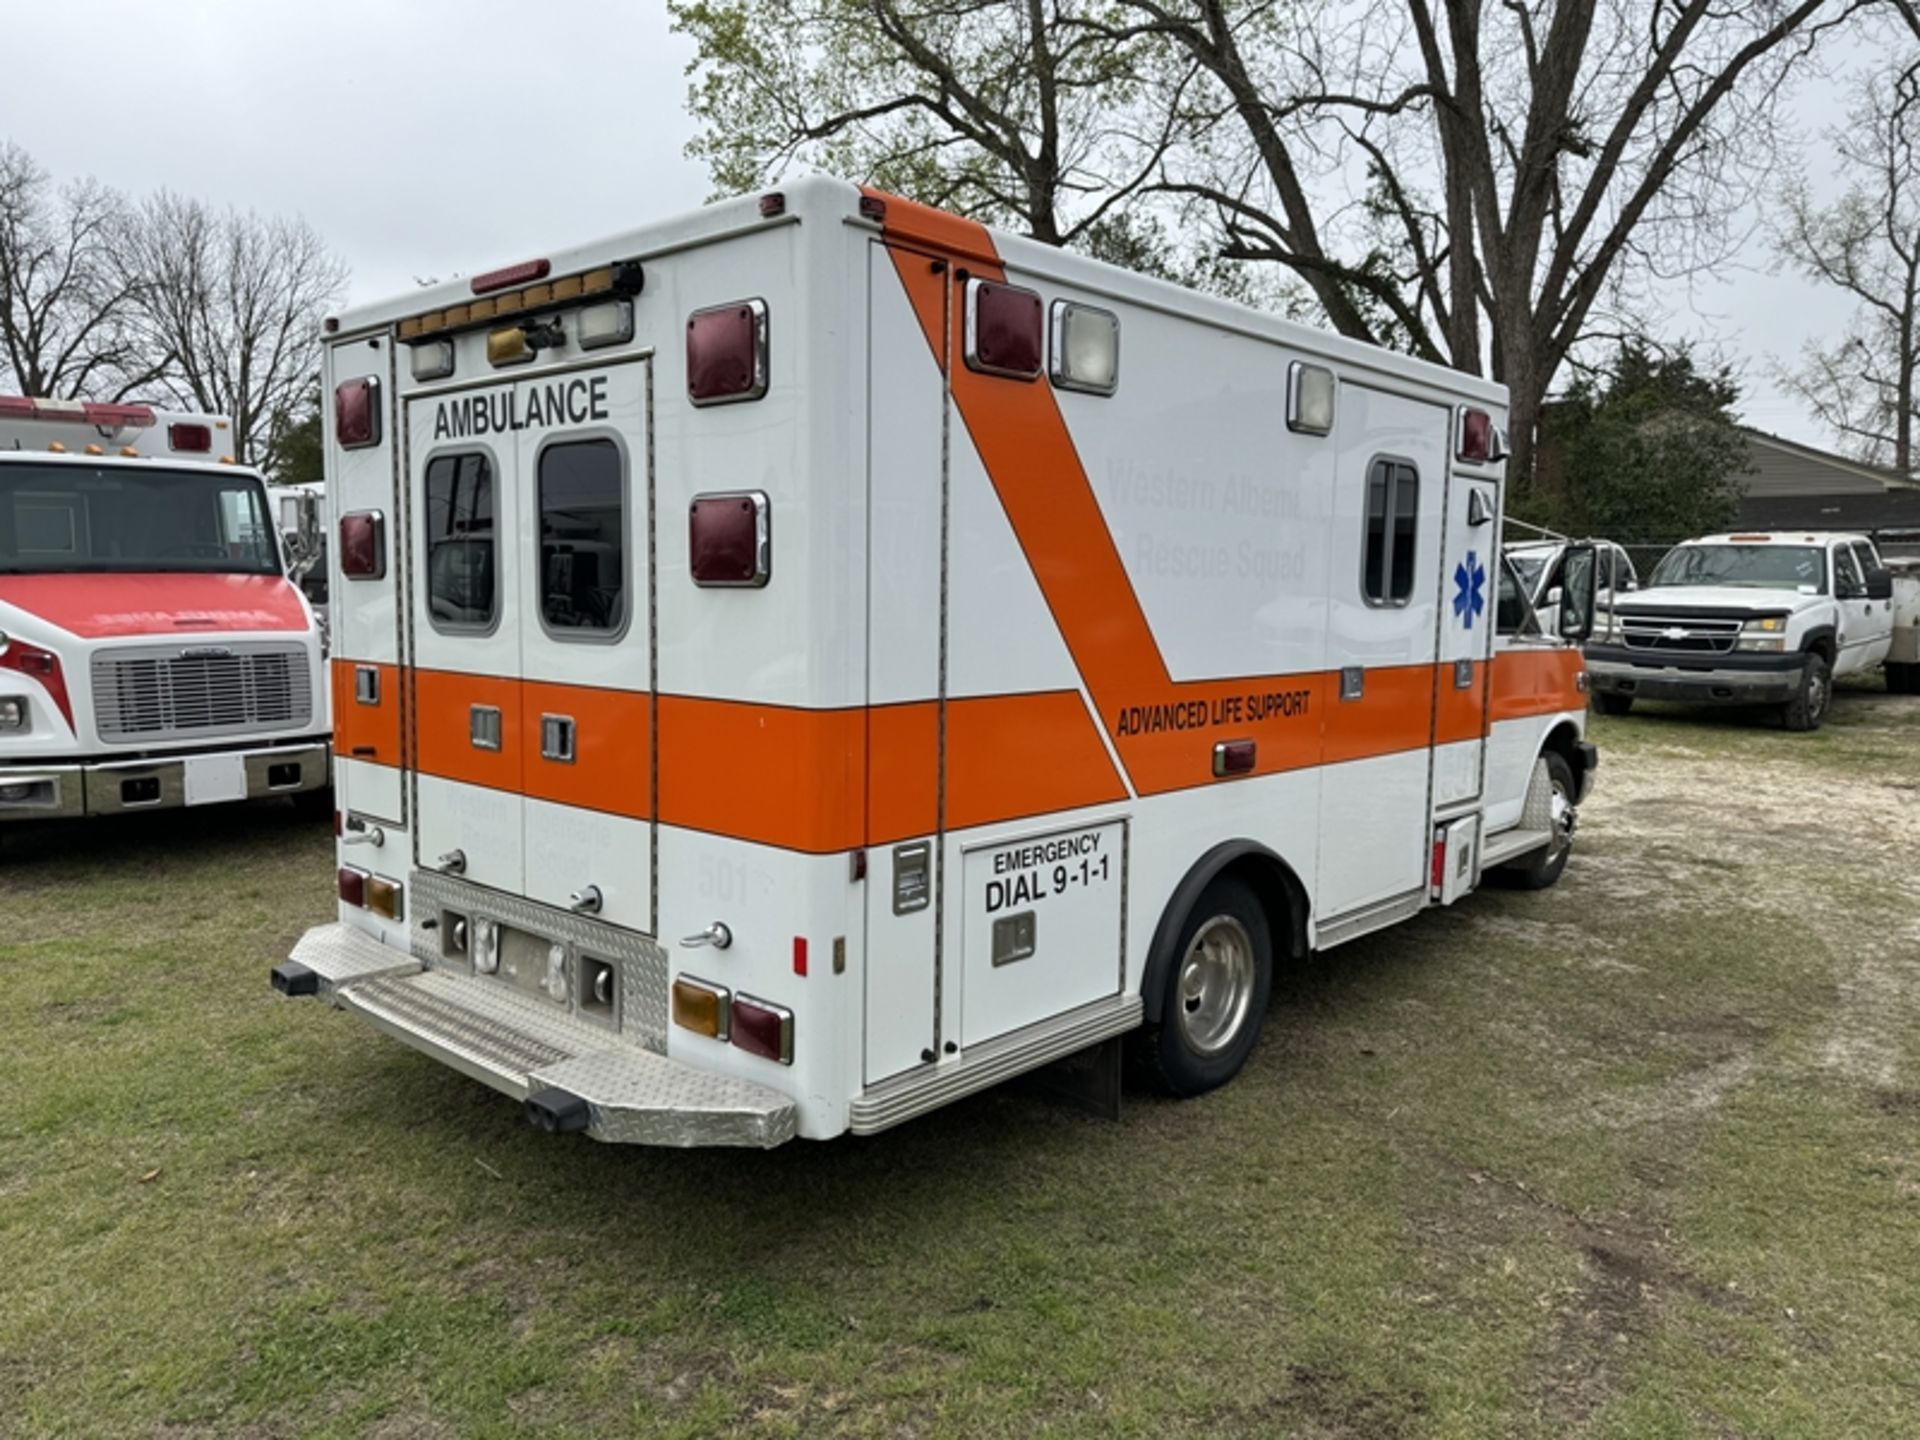 2009 CHEVROLET Ambulance, dsl - 225,093 miles showing - 1GBJG316X91122378 - Image 3 of 6